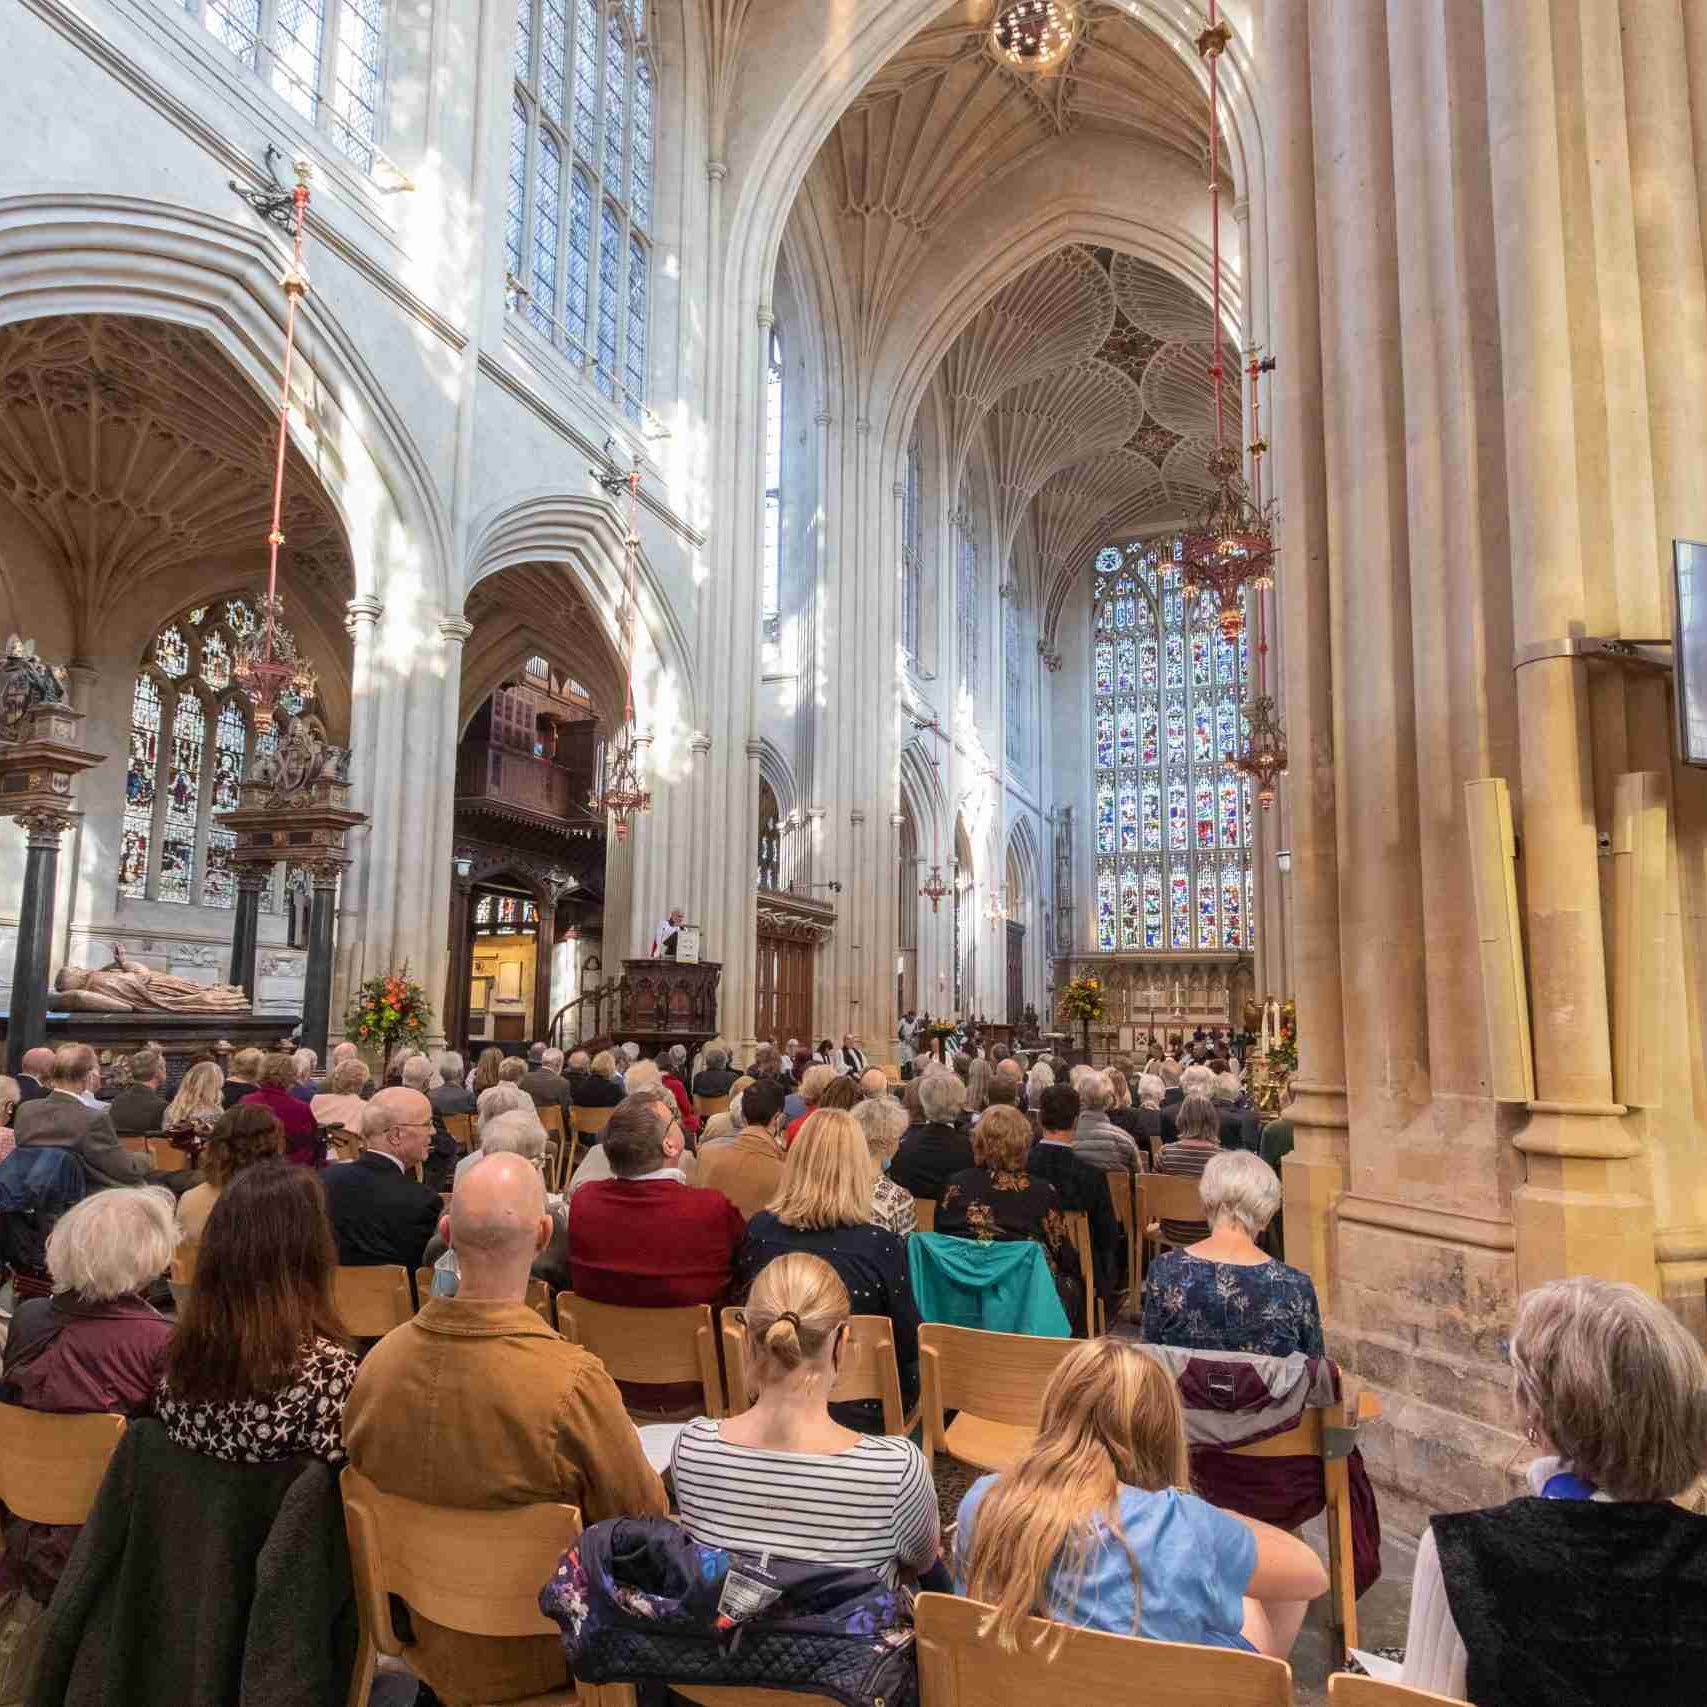 People sat in Bath Abbey listening to a service